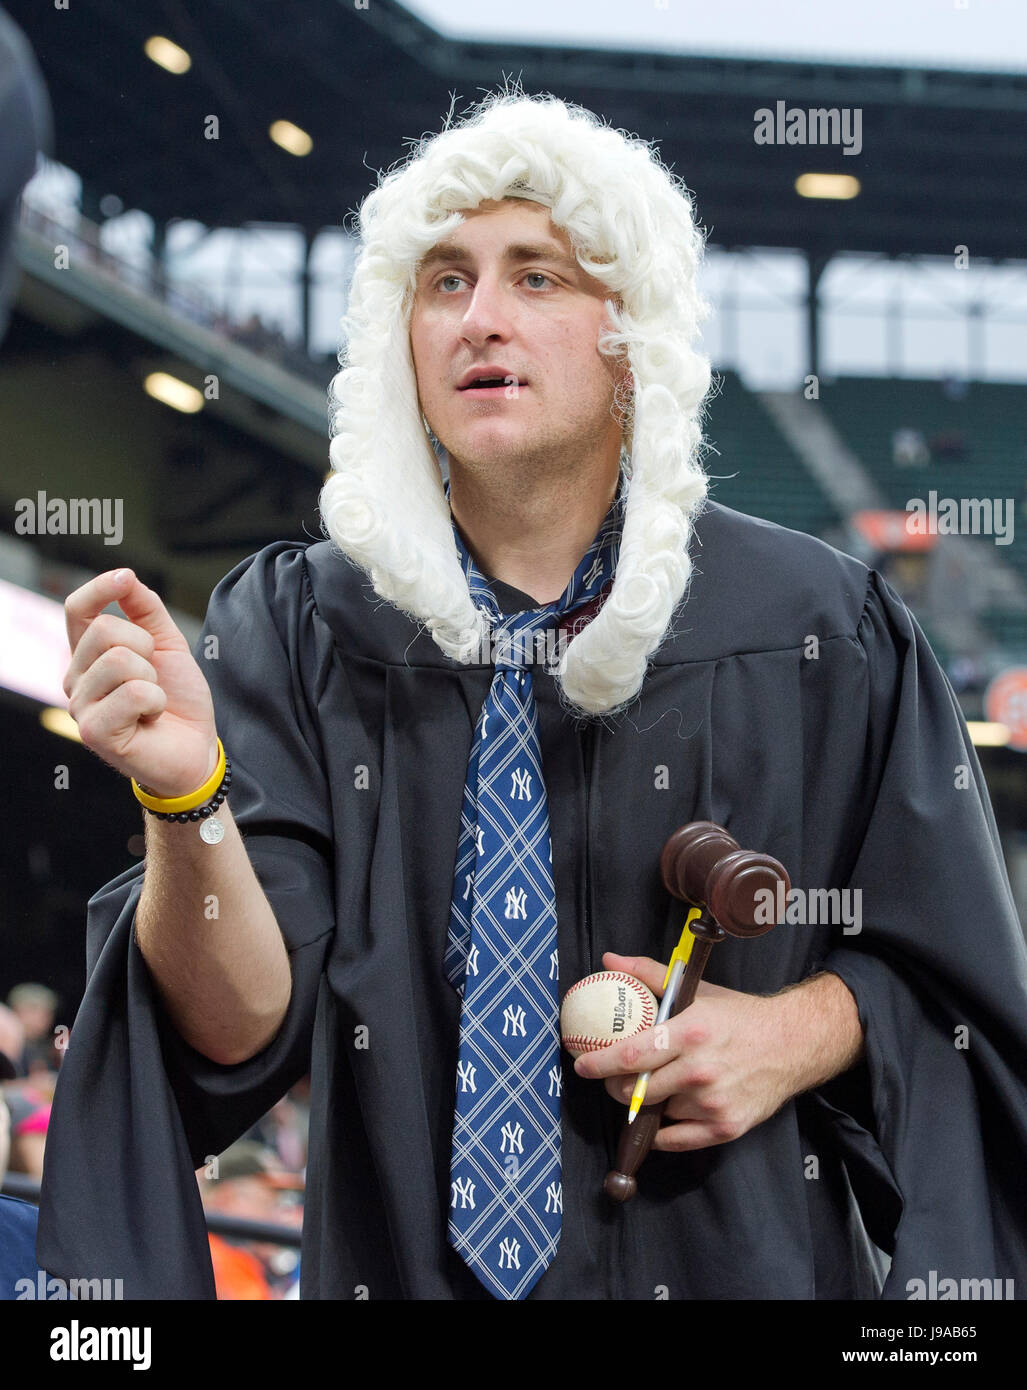 Alek Bernold of Utica, New York, wearing a traditional judge's wig and robe,  cheers for New York Yankees right fielder Aaron Judge (99) prior to the  game against the Baltimore Orioles at